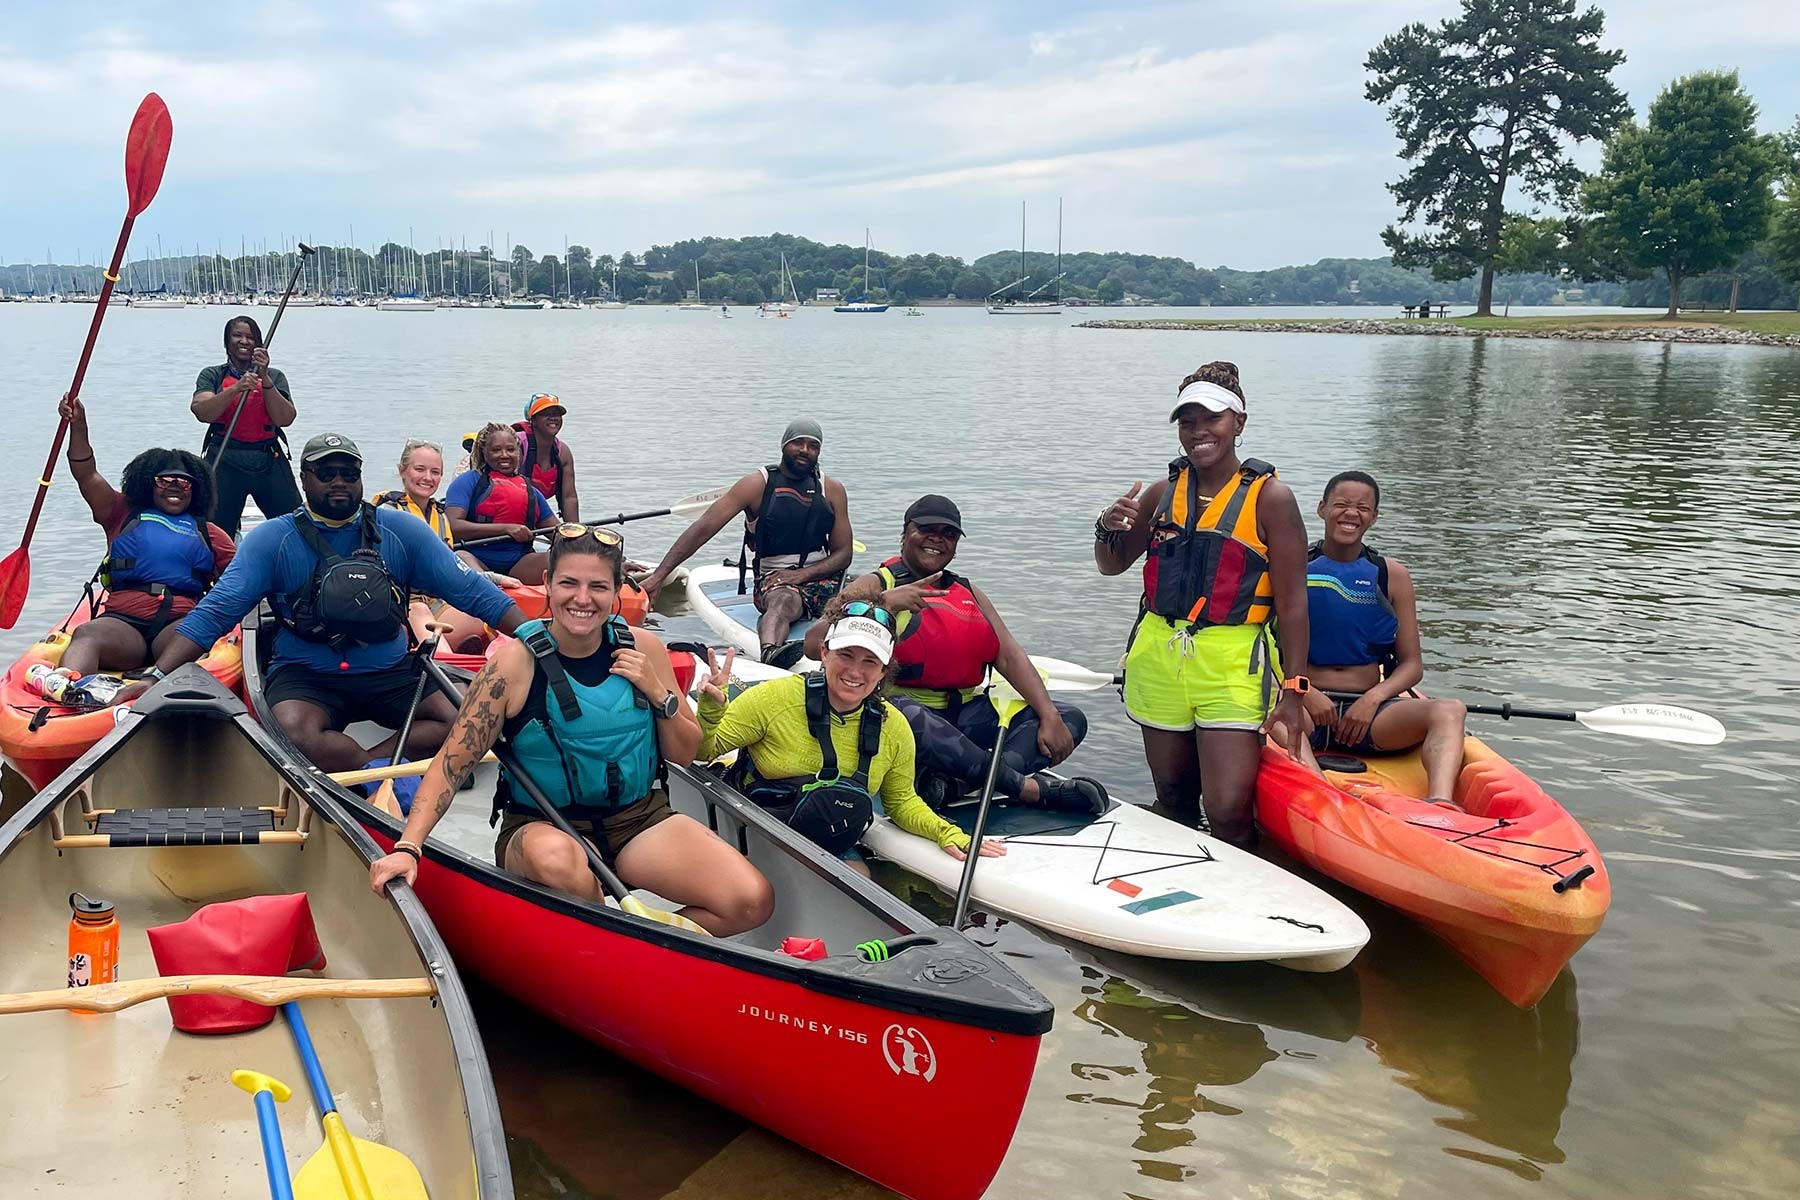 A diverse group of twelve people wearing swimsuits and swim shorts while sitting in boats with paddles in hand along the Tennessee RiverLine